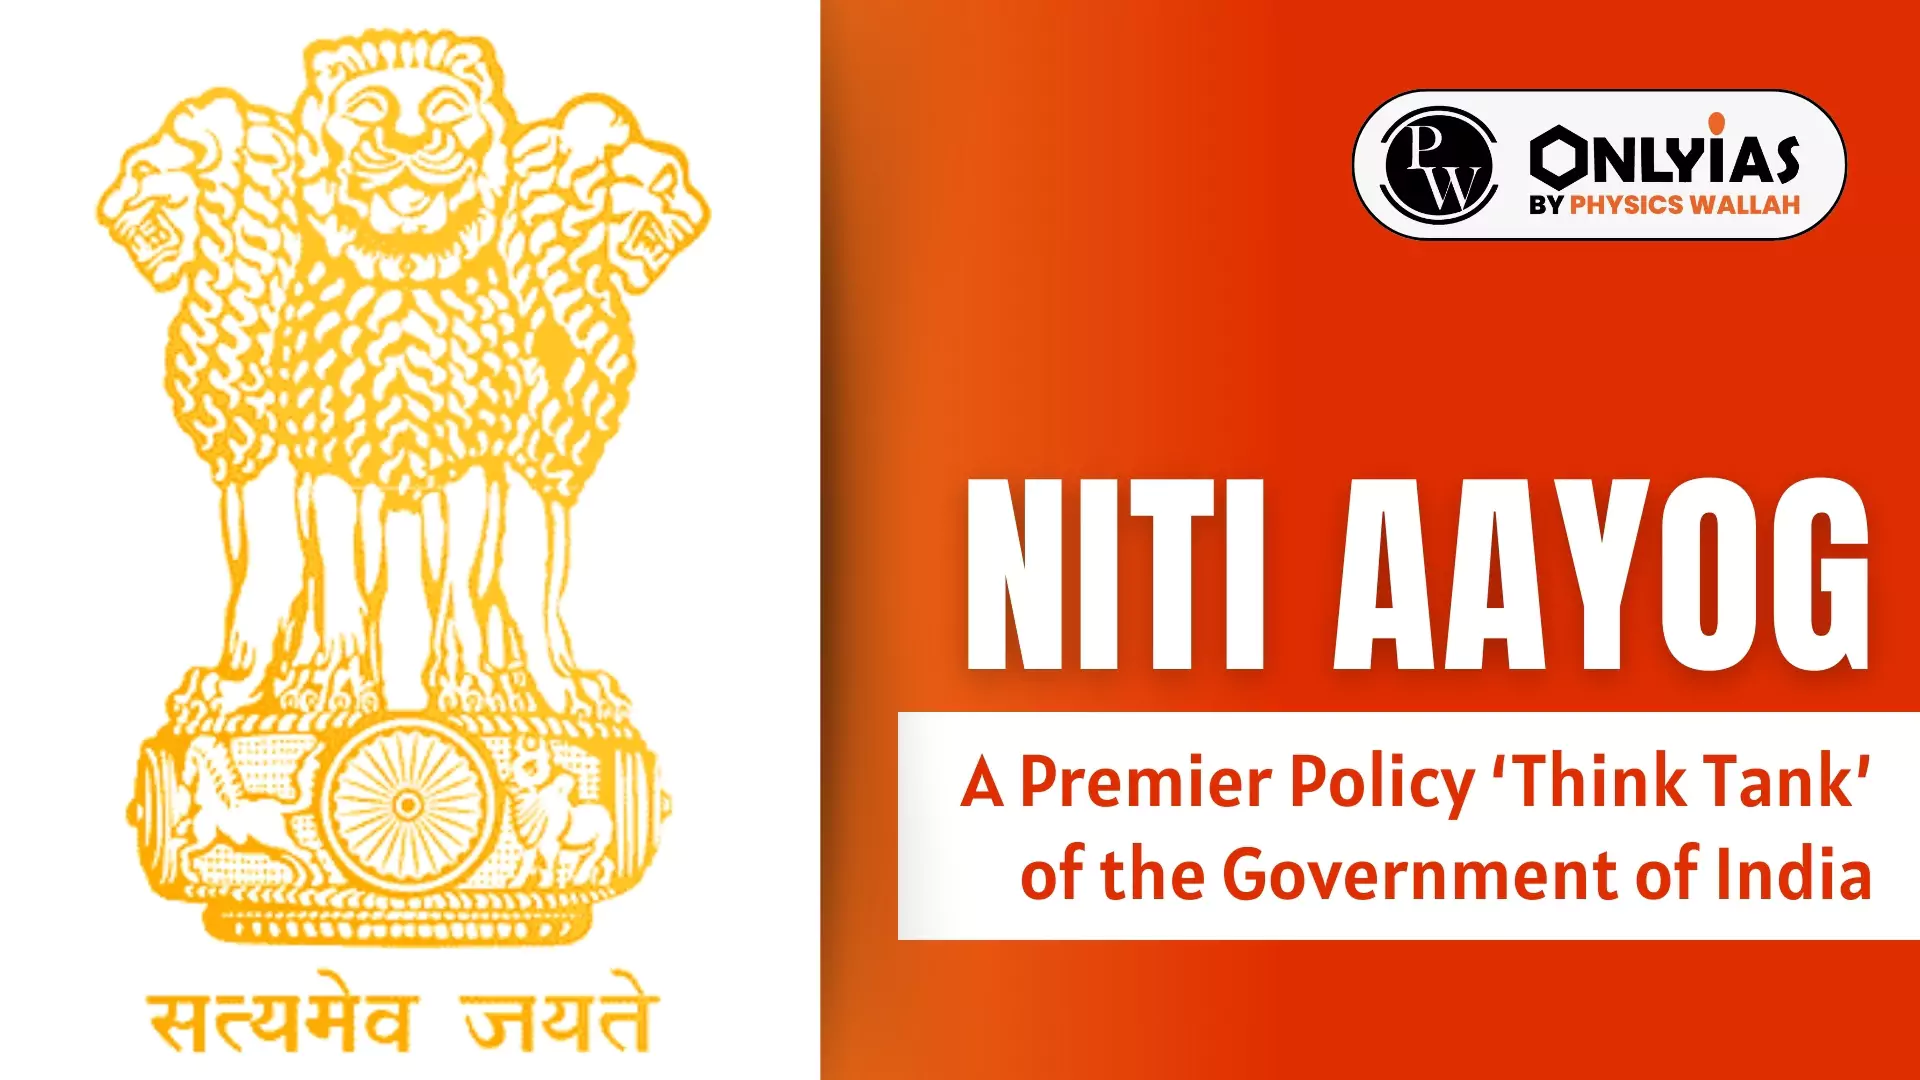 NITI Aayog pitches for structural reforms of multilateral development banks